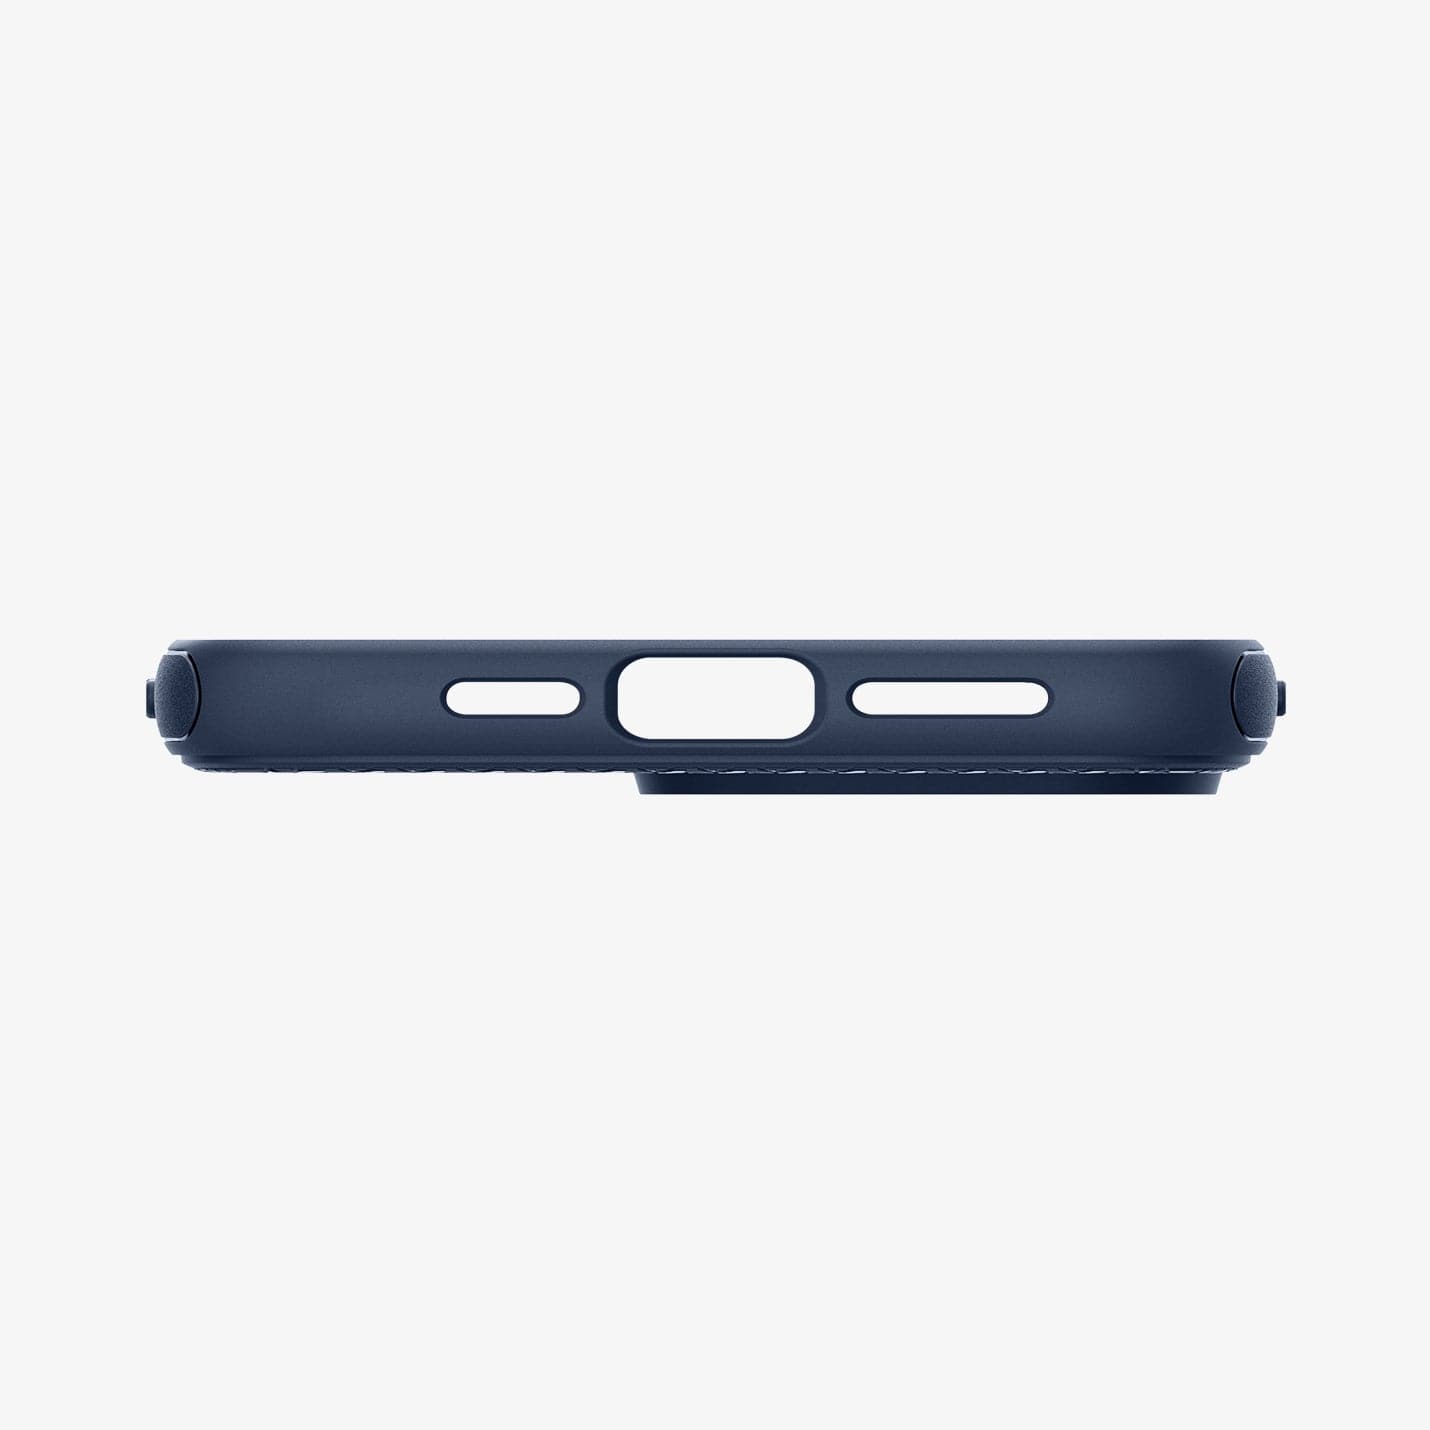 ACS06737 - iPhone 15 Pro Case Mag Armor (MagFit) in navy blue showing the bottom